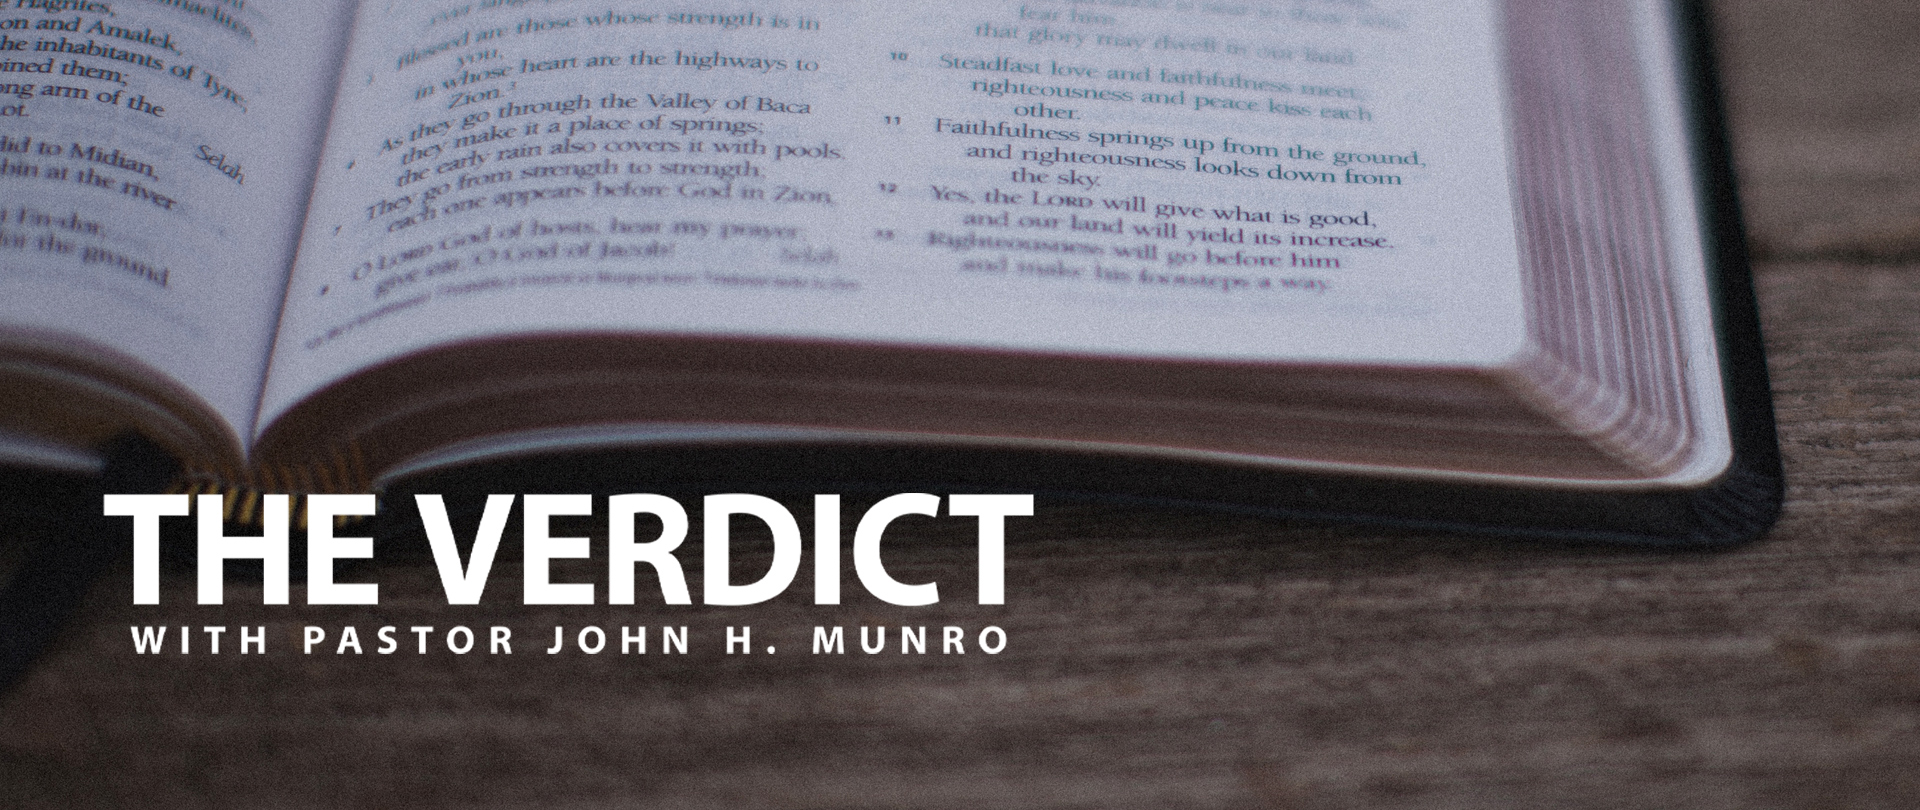 Discover "The Verdict"
Get radio listings and details
New series: The Book of Colossians
